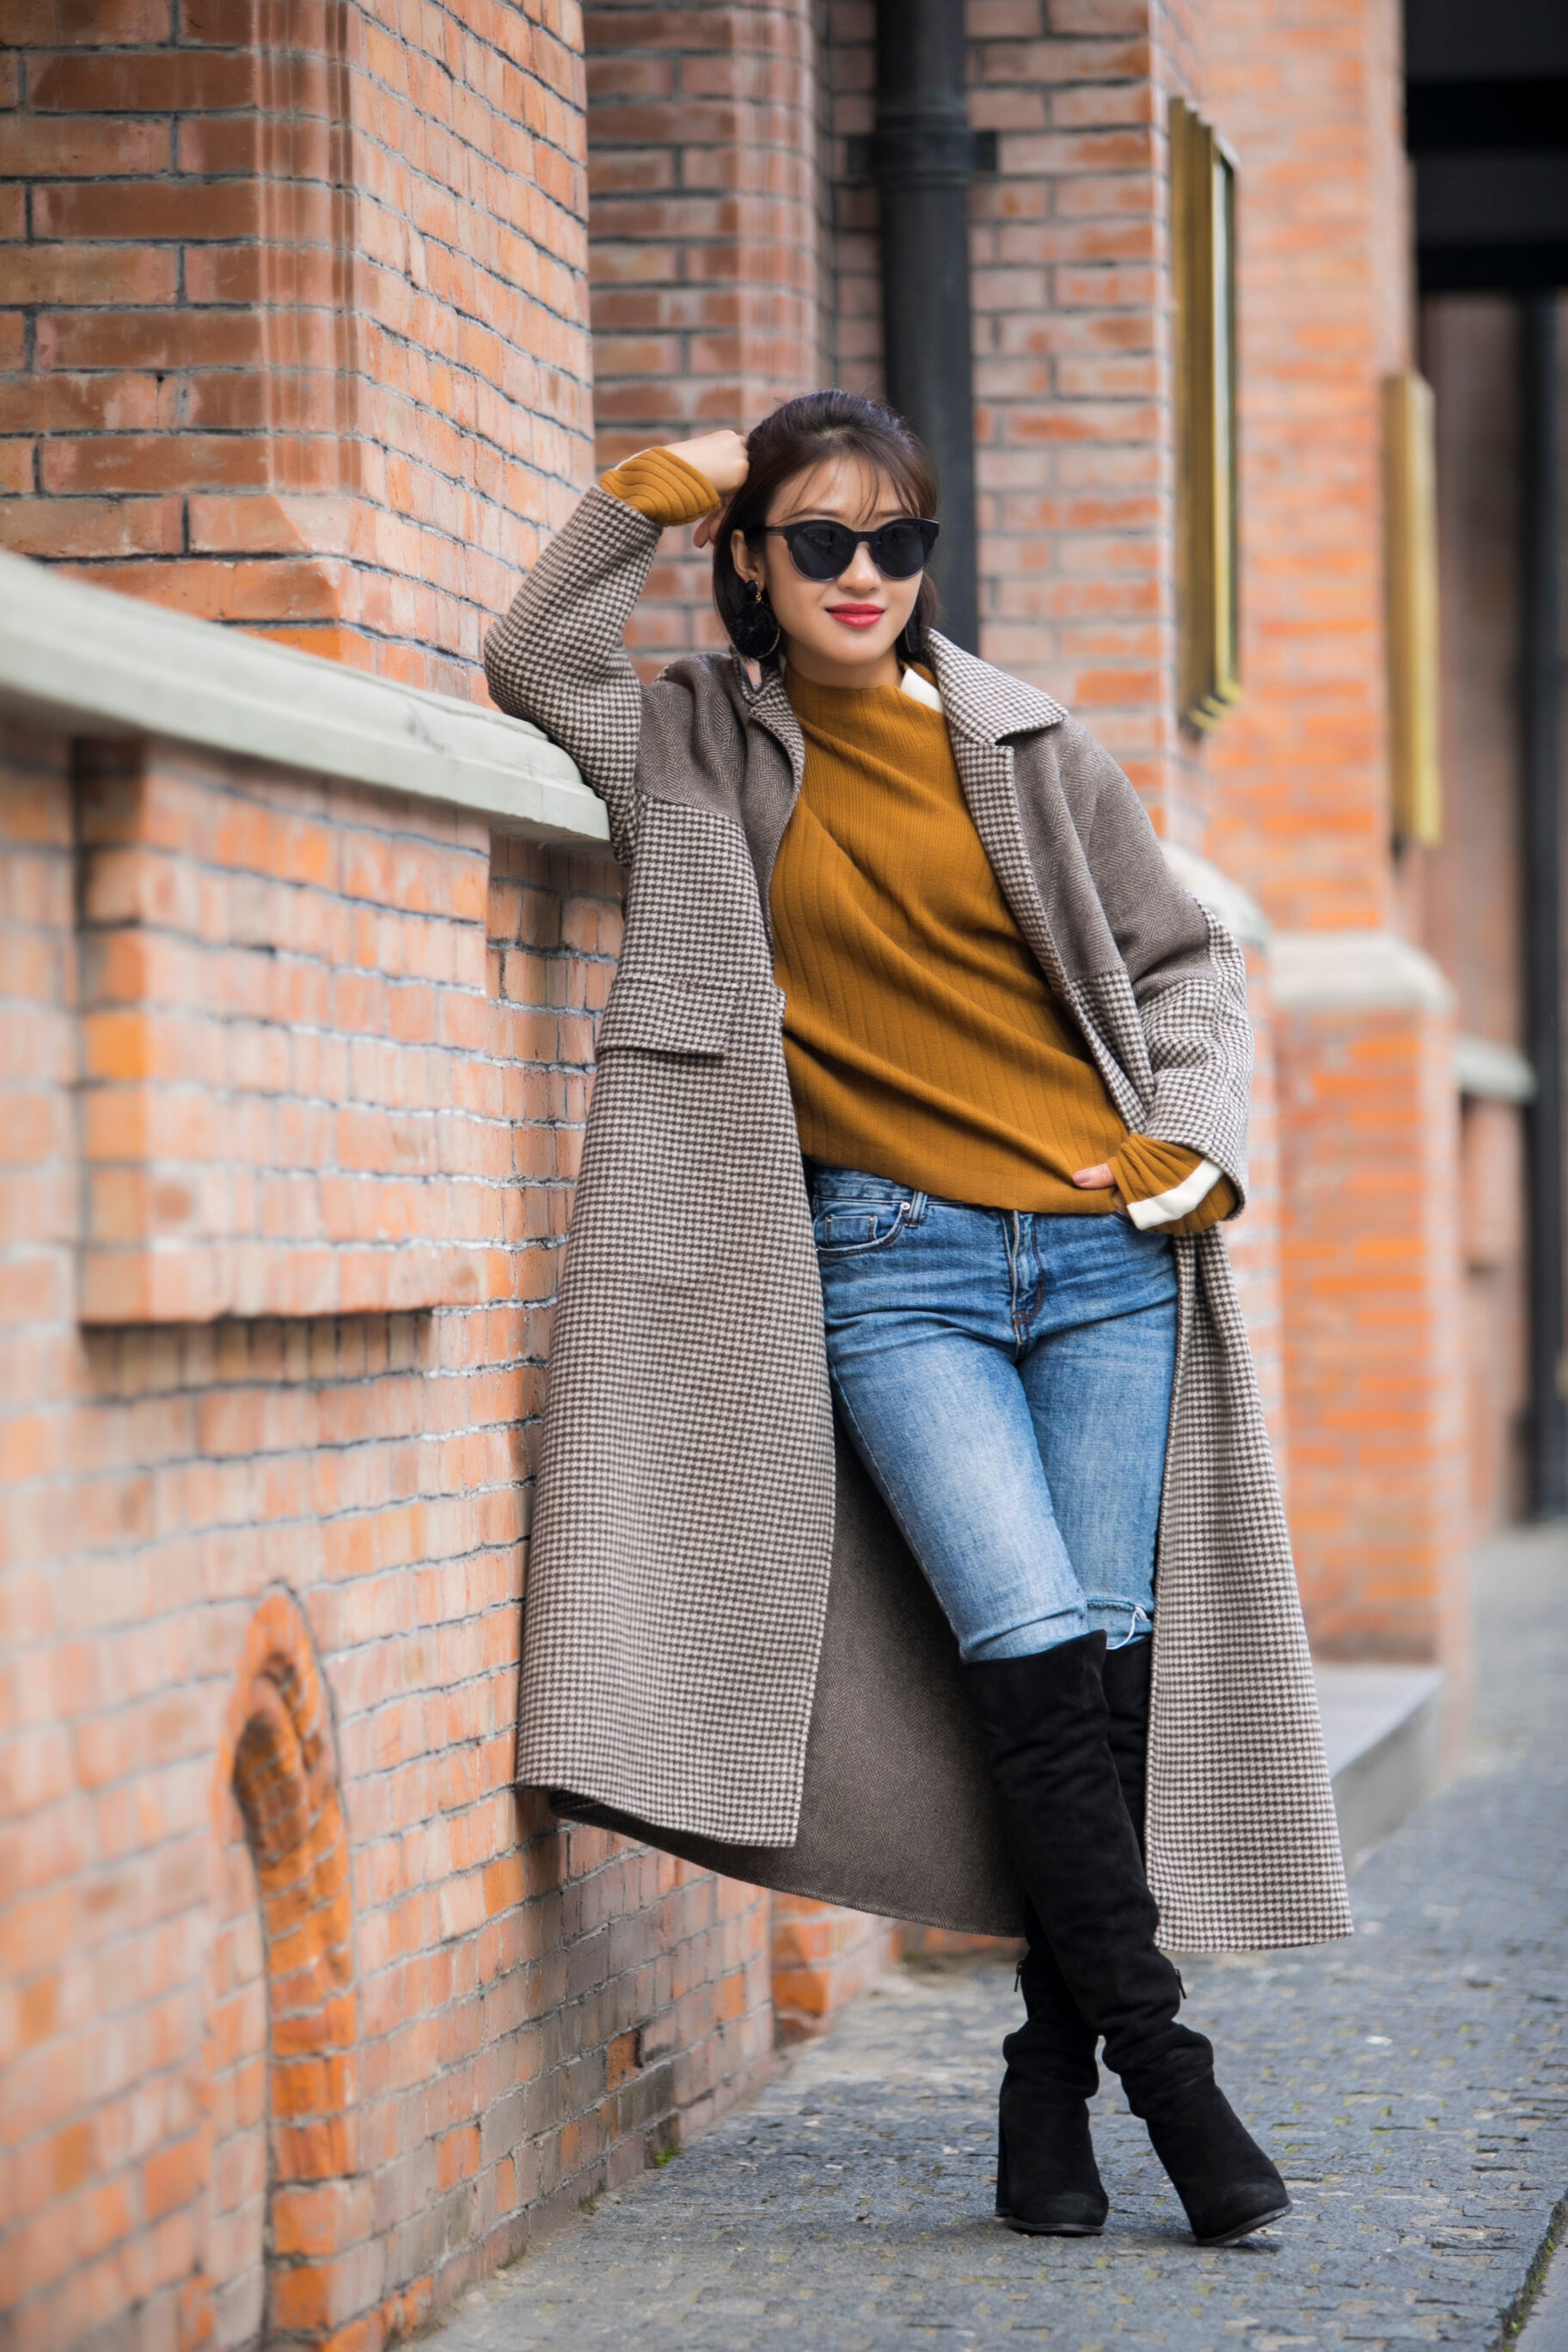 Beige Coat, Turtleneck Sweater, Skinny Jeans, And High-Knee Boots